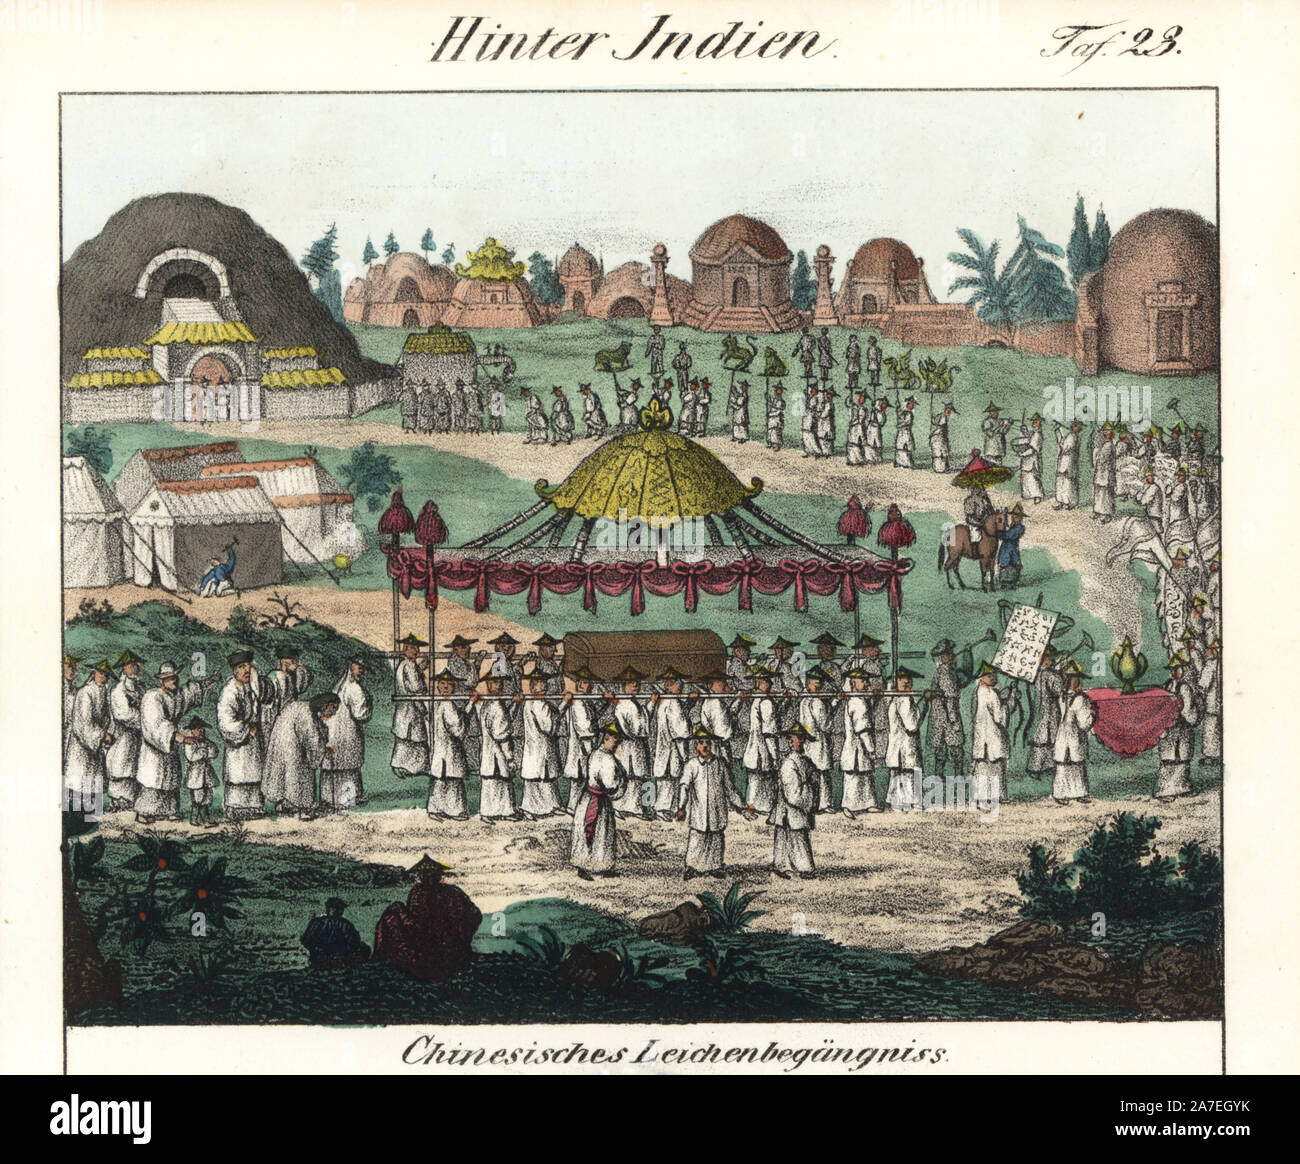 Chinese funeral procession with coffin on a bier and long parade of mourners. Handcoloured lithograph from Friedrich Wilhelm Goedsche's 'Vollstaendige Völkergallerie in getreuen Abbildungen' (Complete Gallery of Peoples in True Pictures), Meissen, circa 1835-1840. Goedsche (1785-1863) was a German writer, bookseller and publisher in Meissen. Many of the illustrations were adapted from Bertuch's 'Bilderbuch fur Kinder' and others. Stock Photo